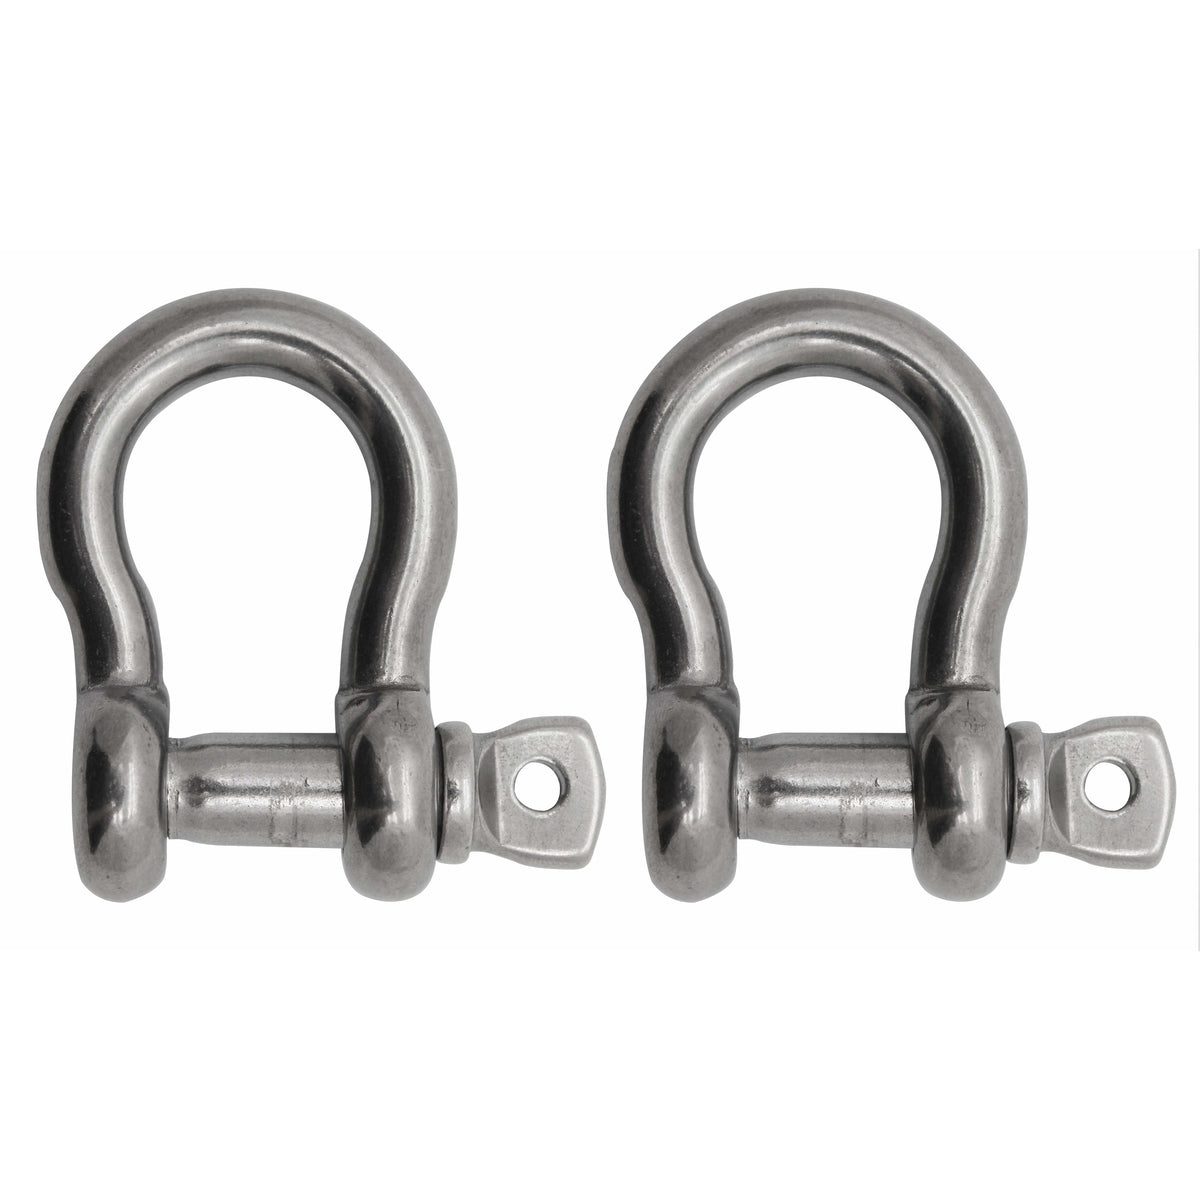 Extreme Max BoatTector SS Anchor Shackle 5/16" 2-pk #3006.8315.2